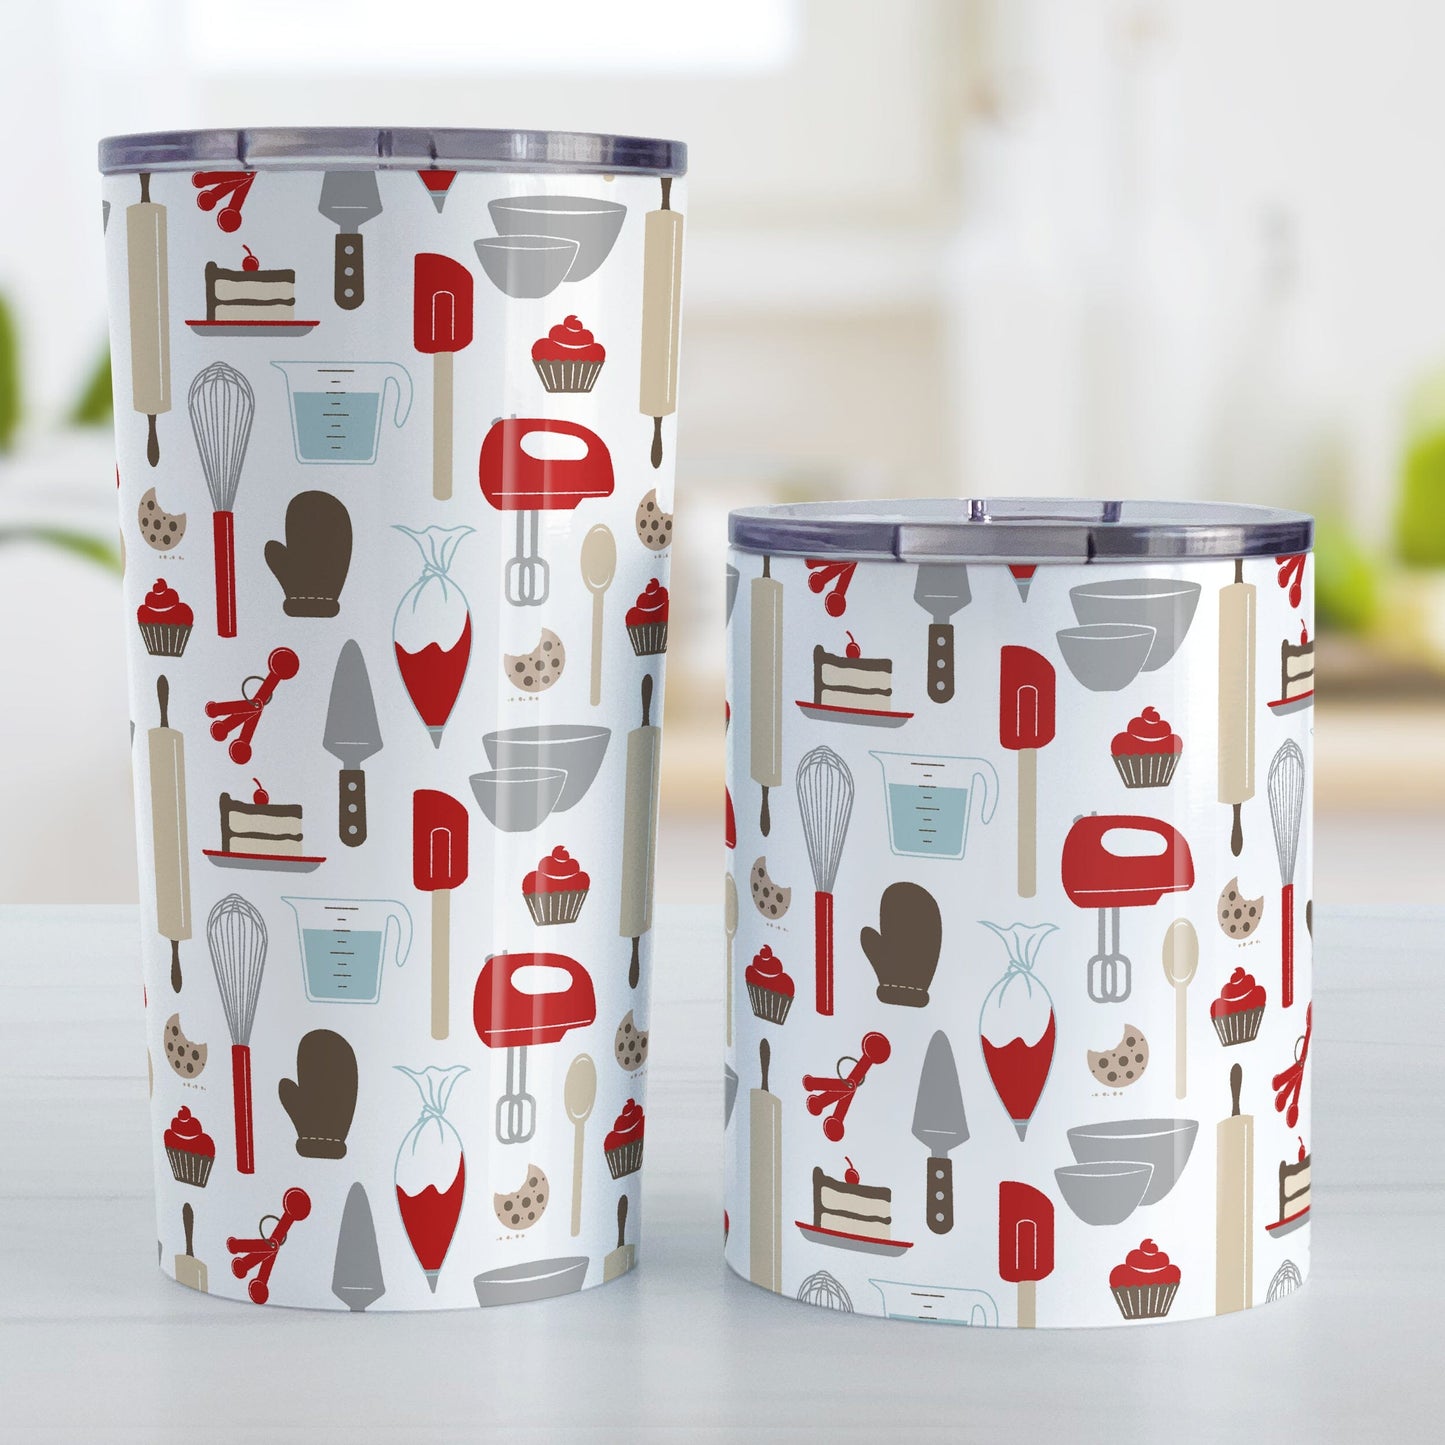 Red Baking Pattern Tumbler Cups (20oz or 10oz) at Amy's Coffee Mugs. Stainless steel tumbler cups designed with a pattern of baking tools like spatulas, whisks, mixers, bowls, and spoons, with cookies, cupcakes, and cake all in a red, gray, brown, and beige color scheme that wraps around the cups. Photo shows both sized cups on a table next to each other. 